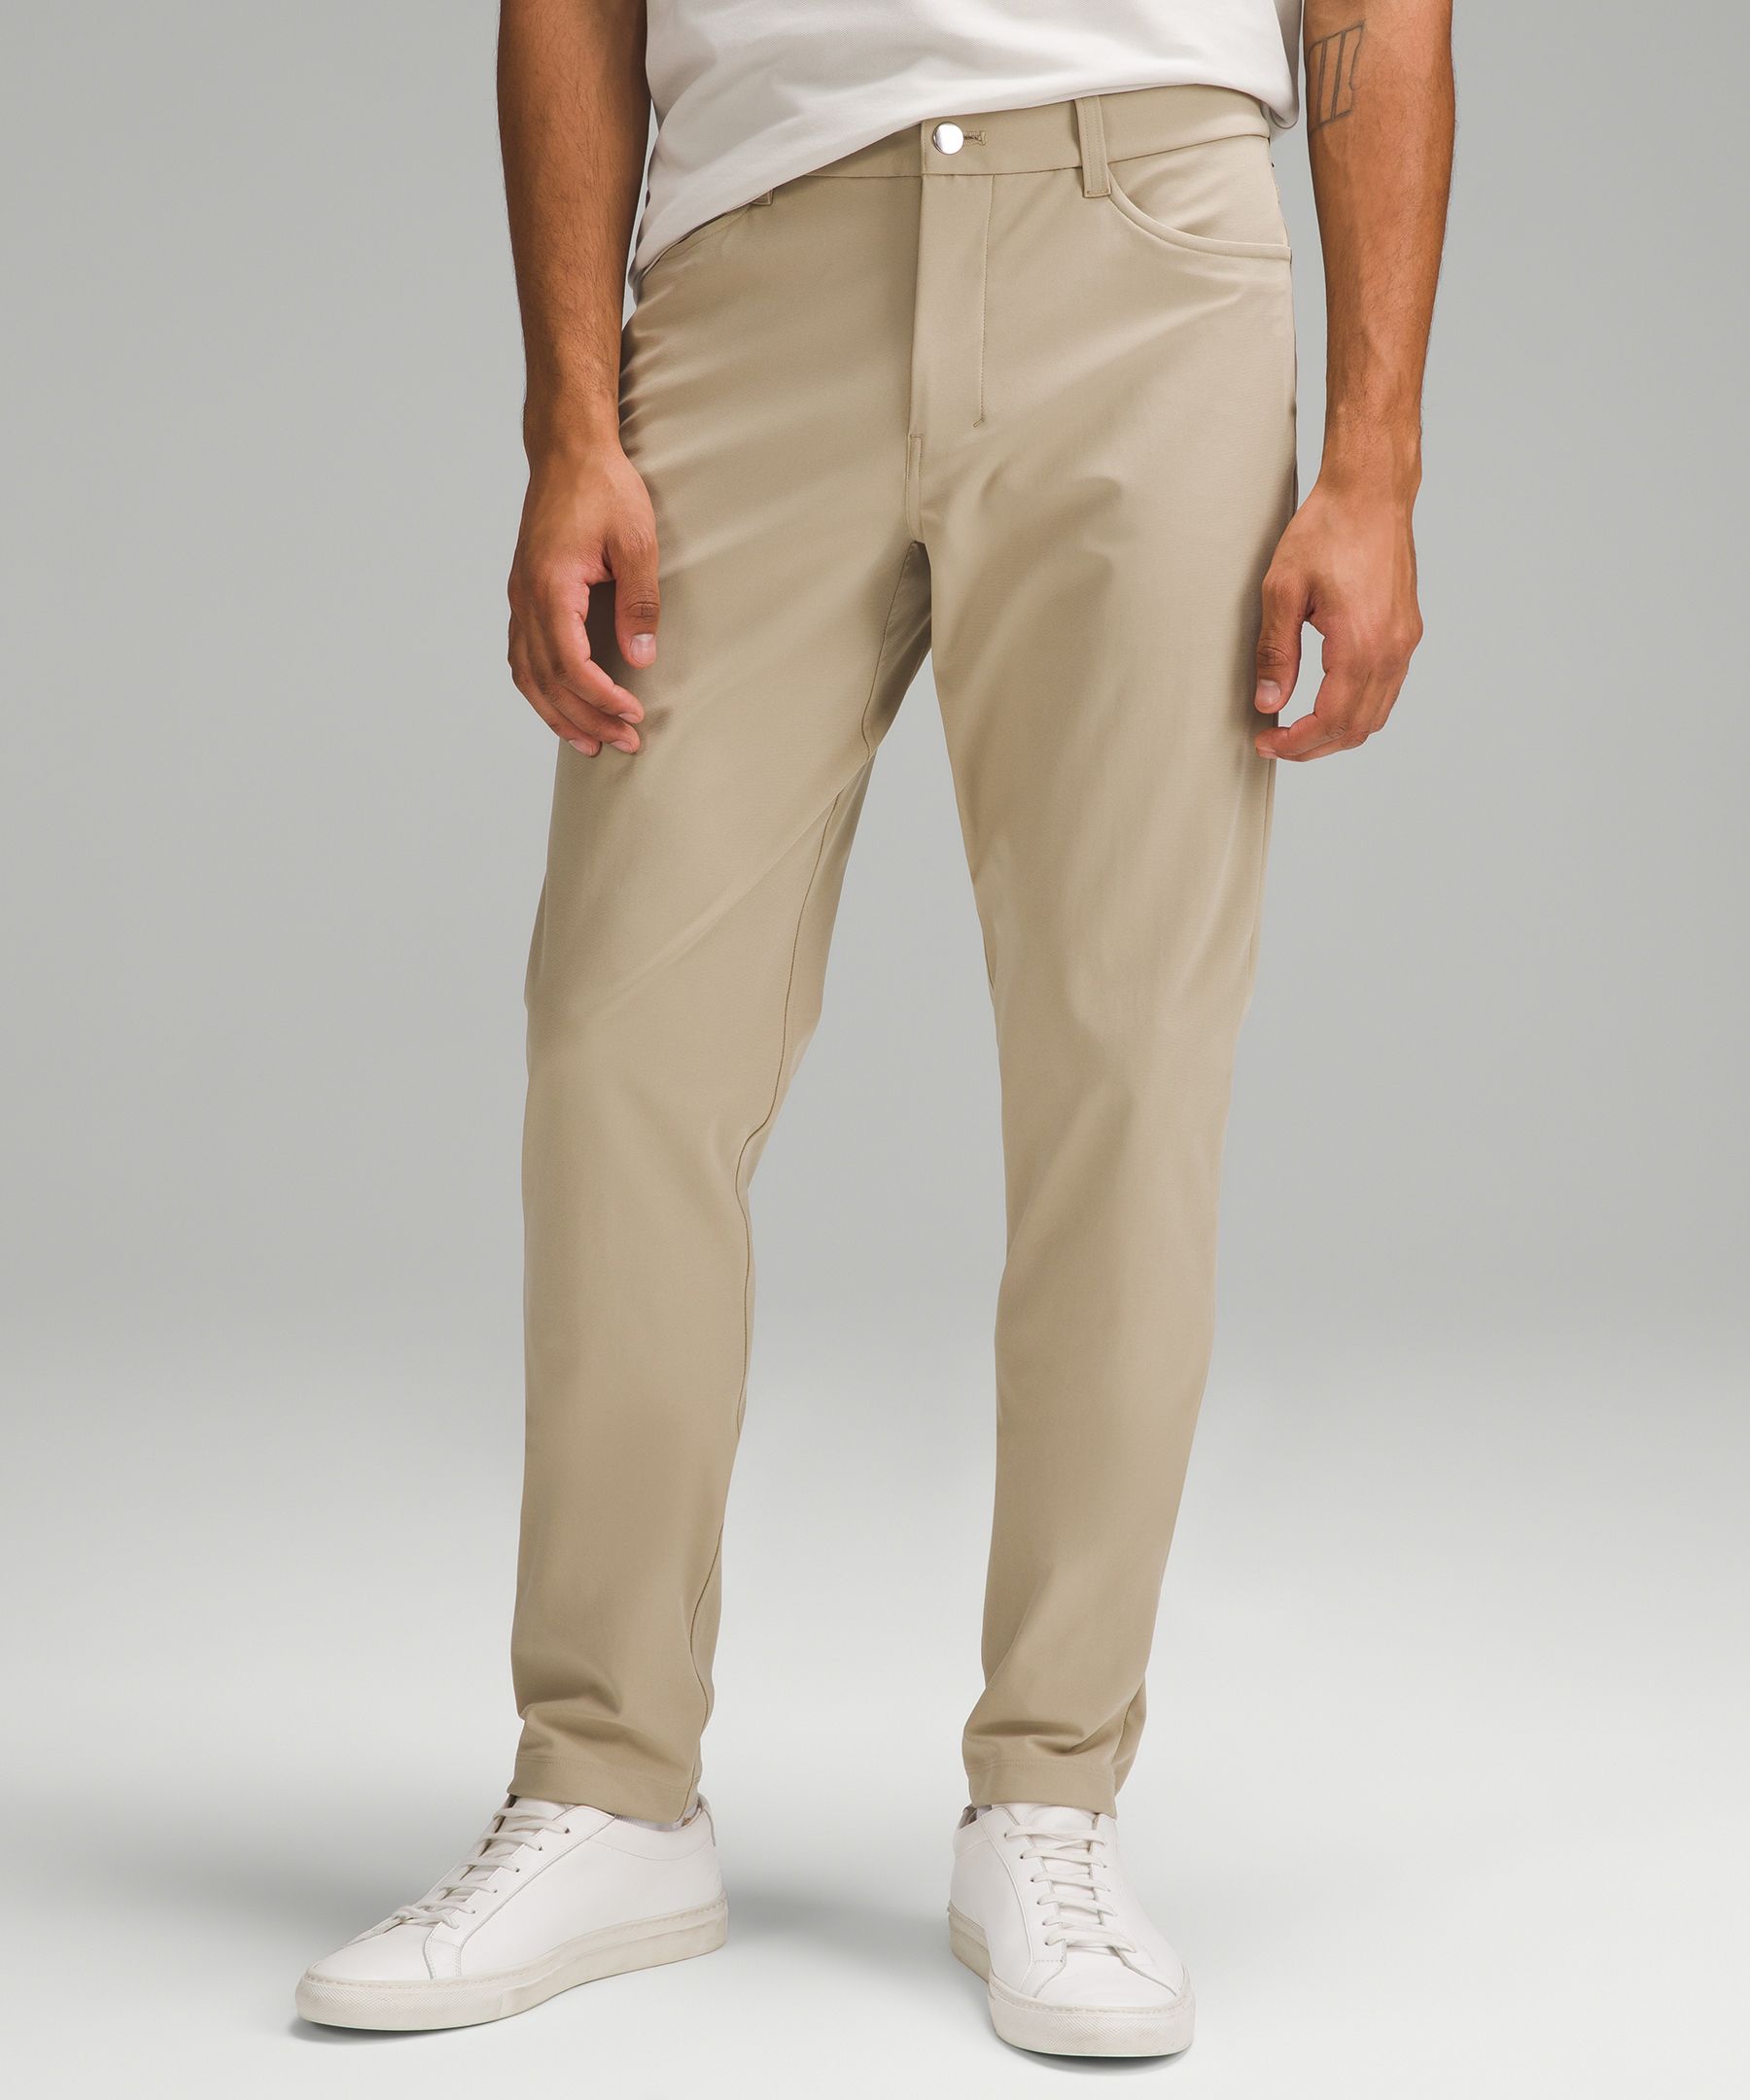 ABC Pant Slim 32” *Warpstreme in True Navy + 5 Year Basic Long Sleeve (size  L) in White and a pair of all white minimalist sneakers makes for a perfect  casual Friday